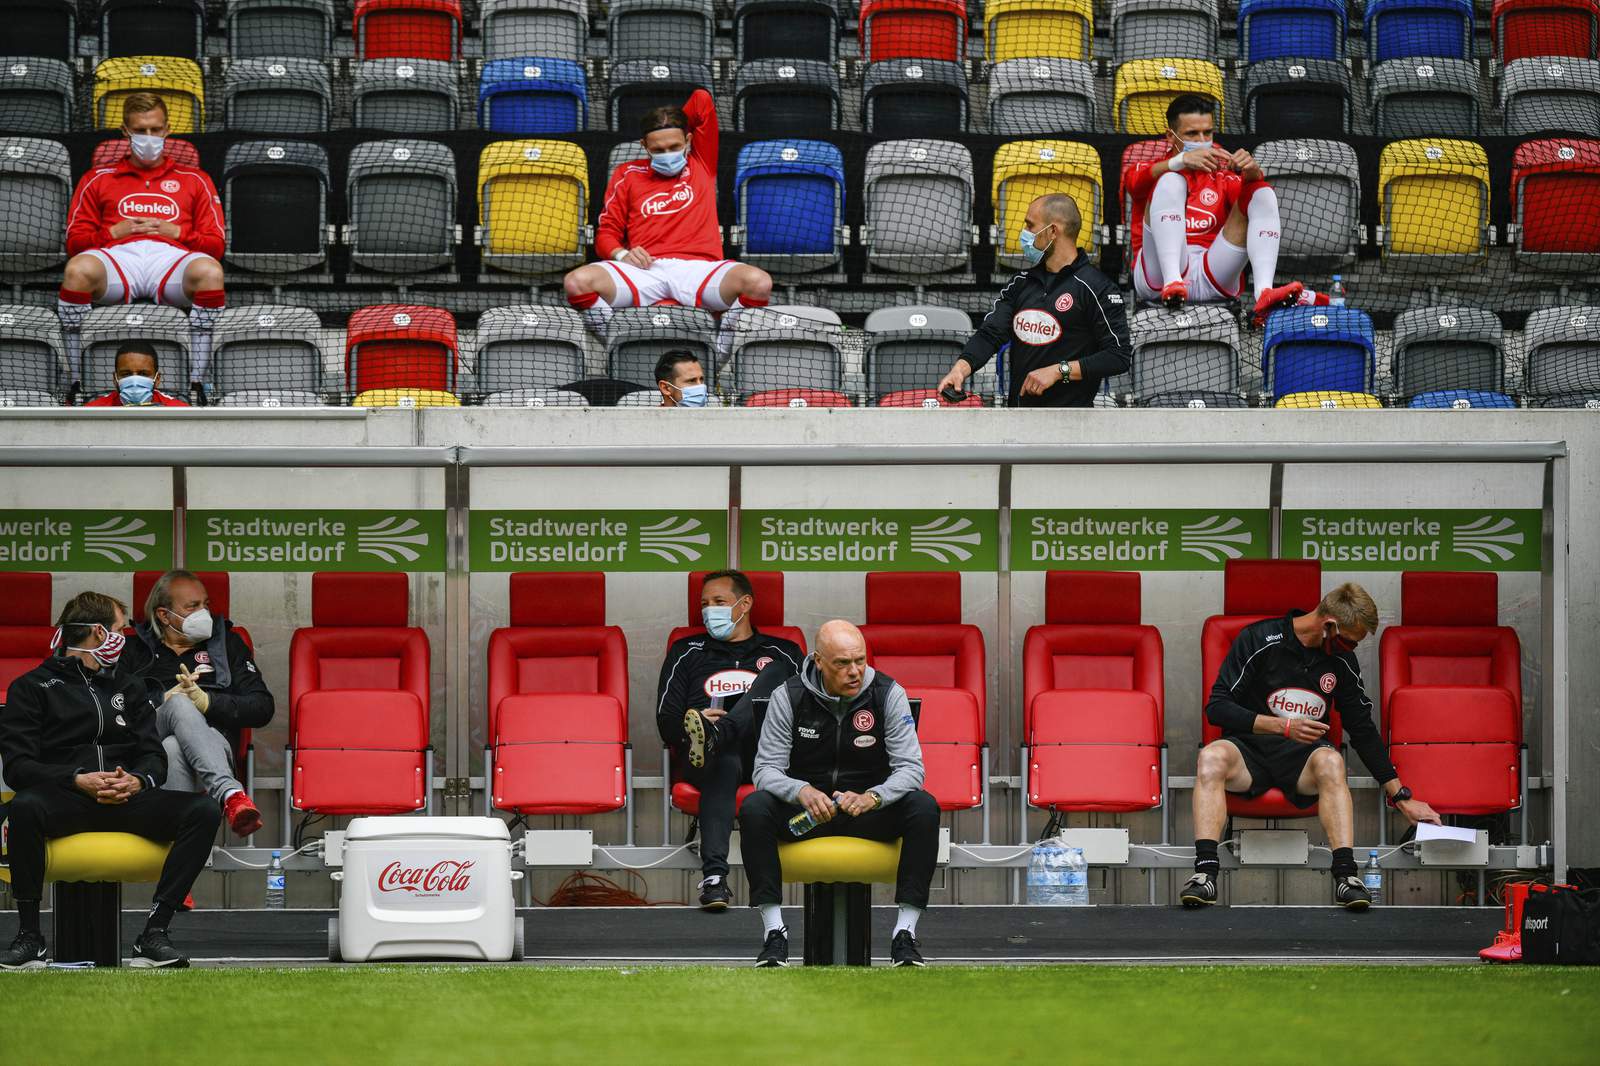 Bundesliga coaches find their voices without crowd noise